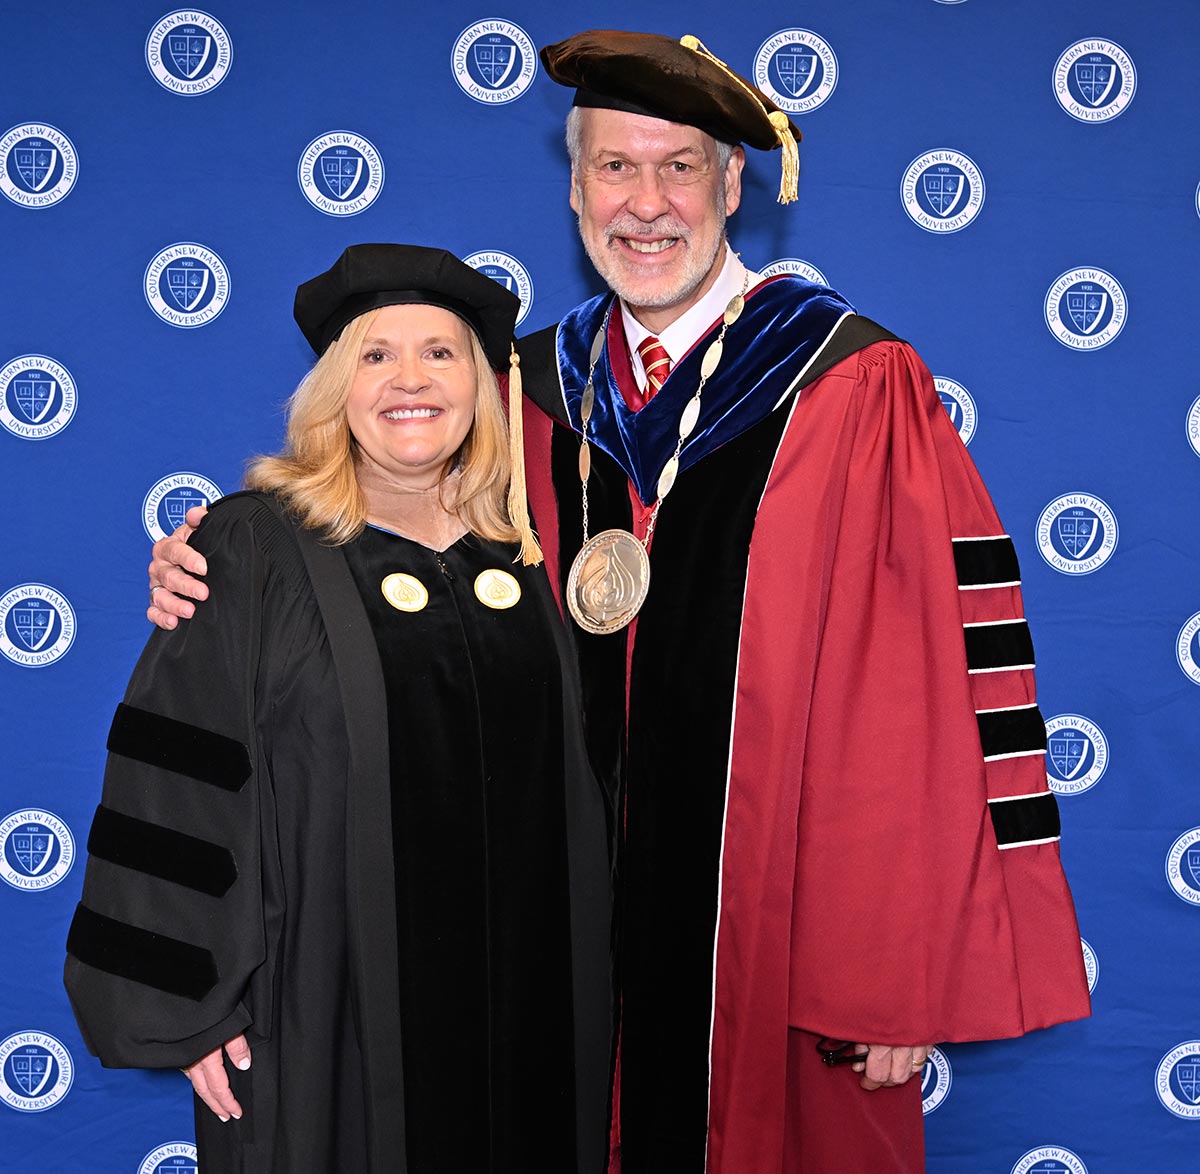 Man in red collegiate robes, a hat with a tassel,  and a medal around his neck, standing next to a woman in black collegiate robes and a hat with a tassel in front of a blue background